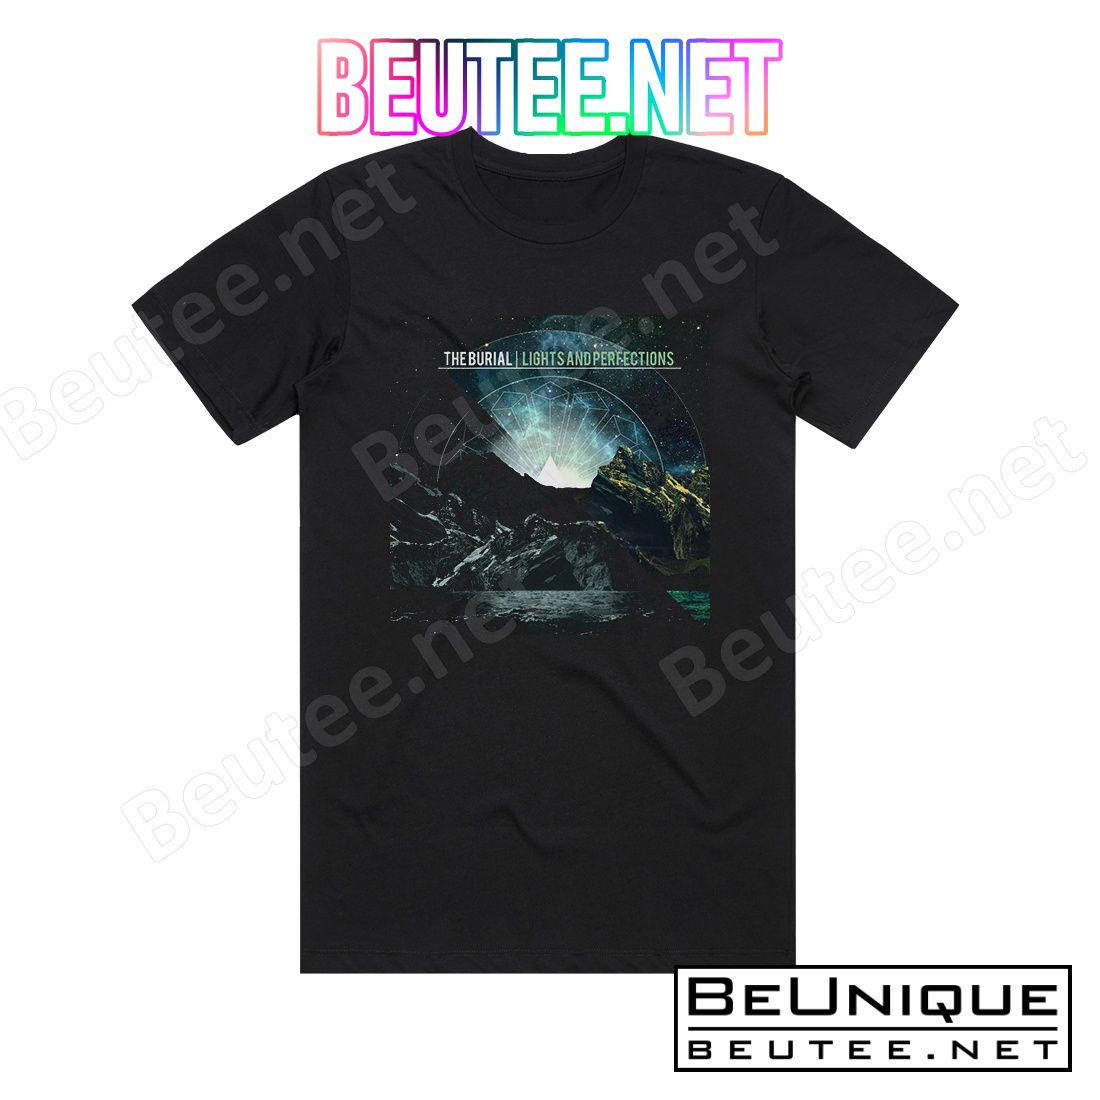 Burial Lights And Perfections Album Cover T-Shirt